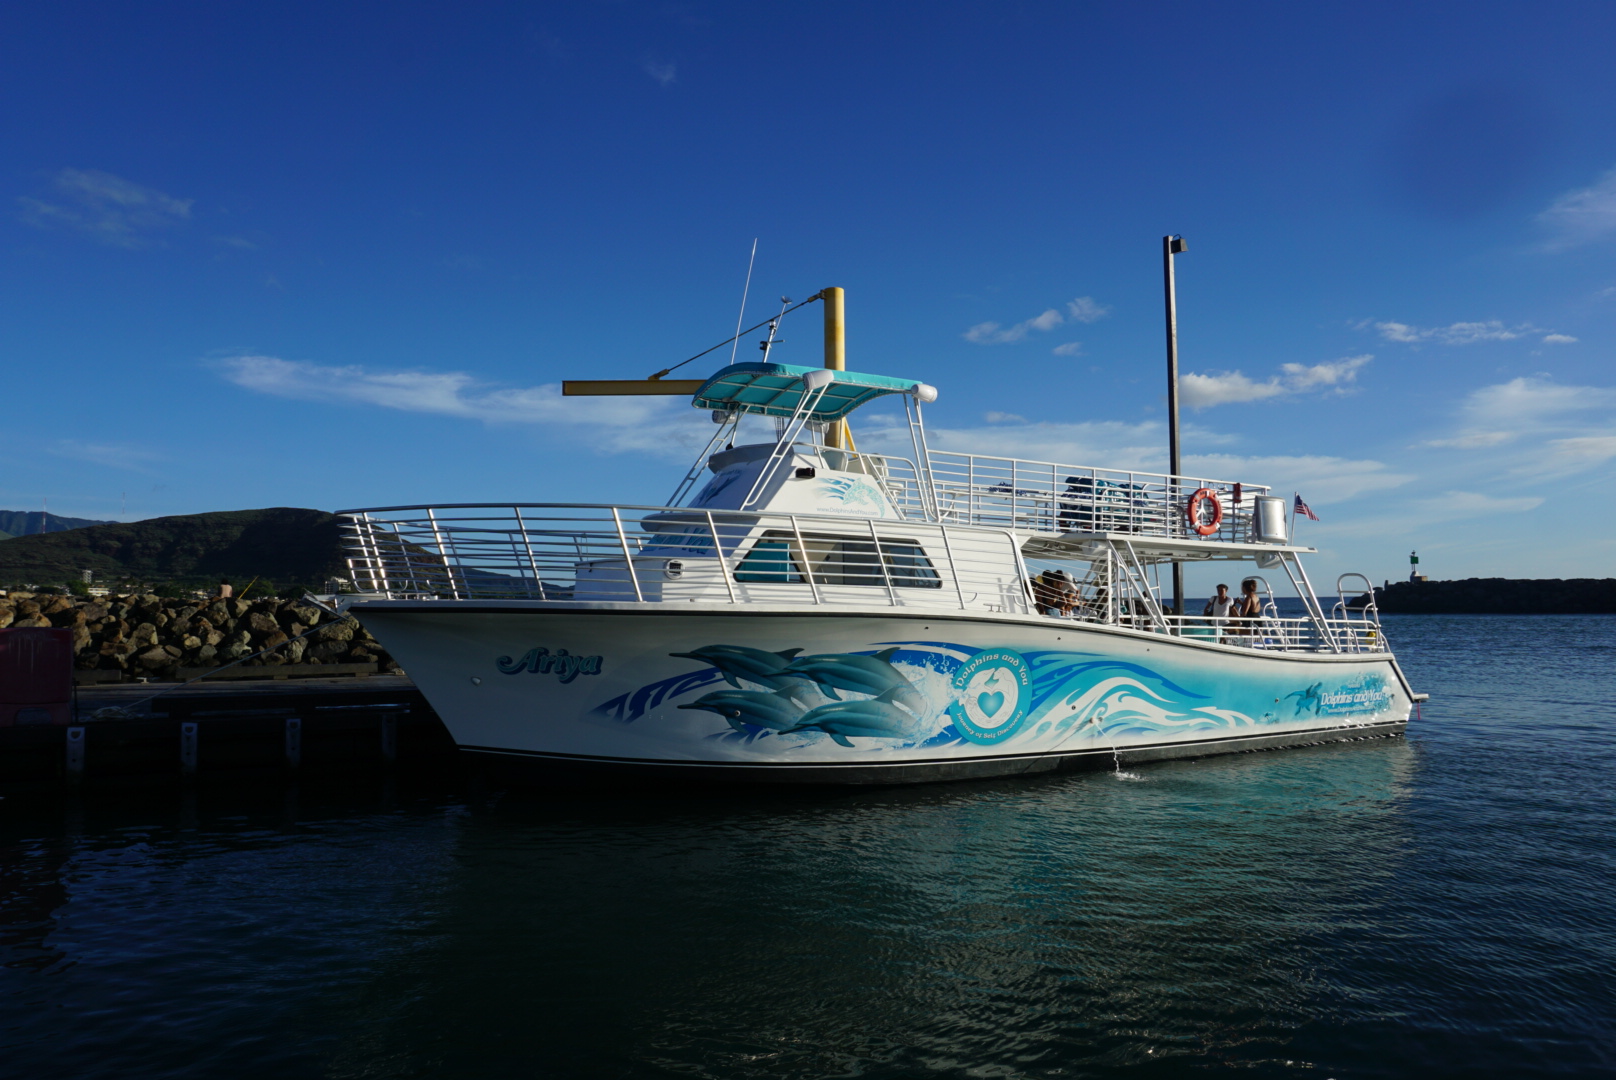 The new whale watching tours were made possible by the purchase of a new boat.